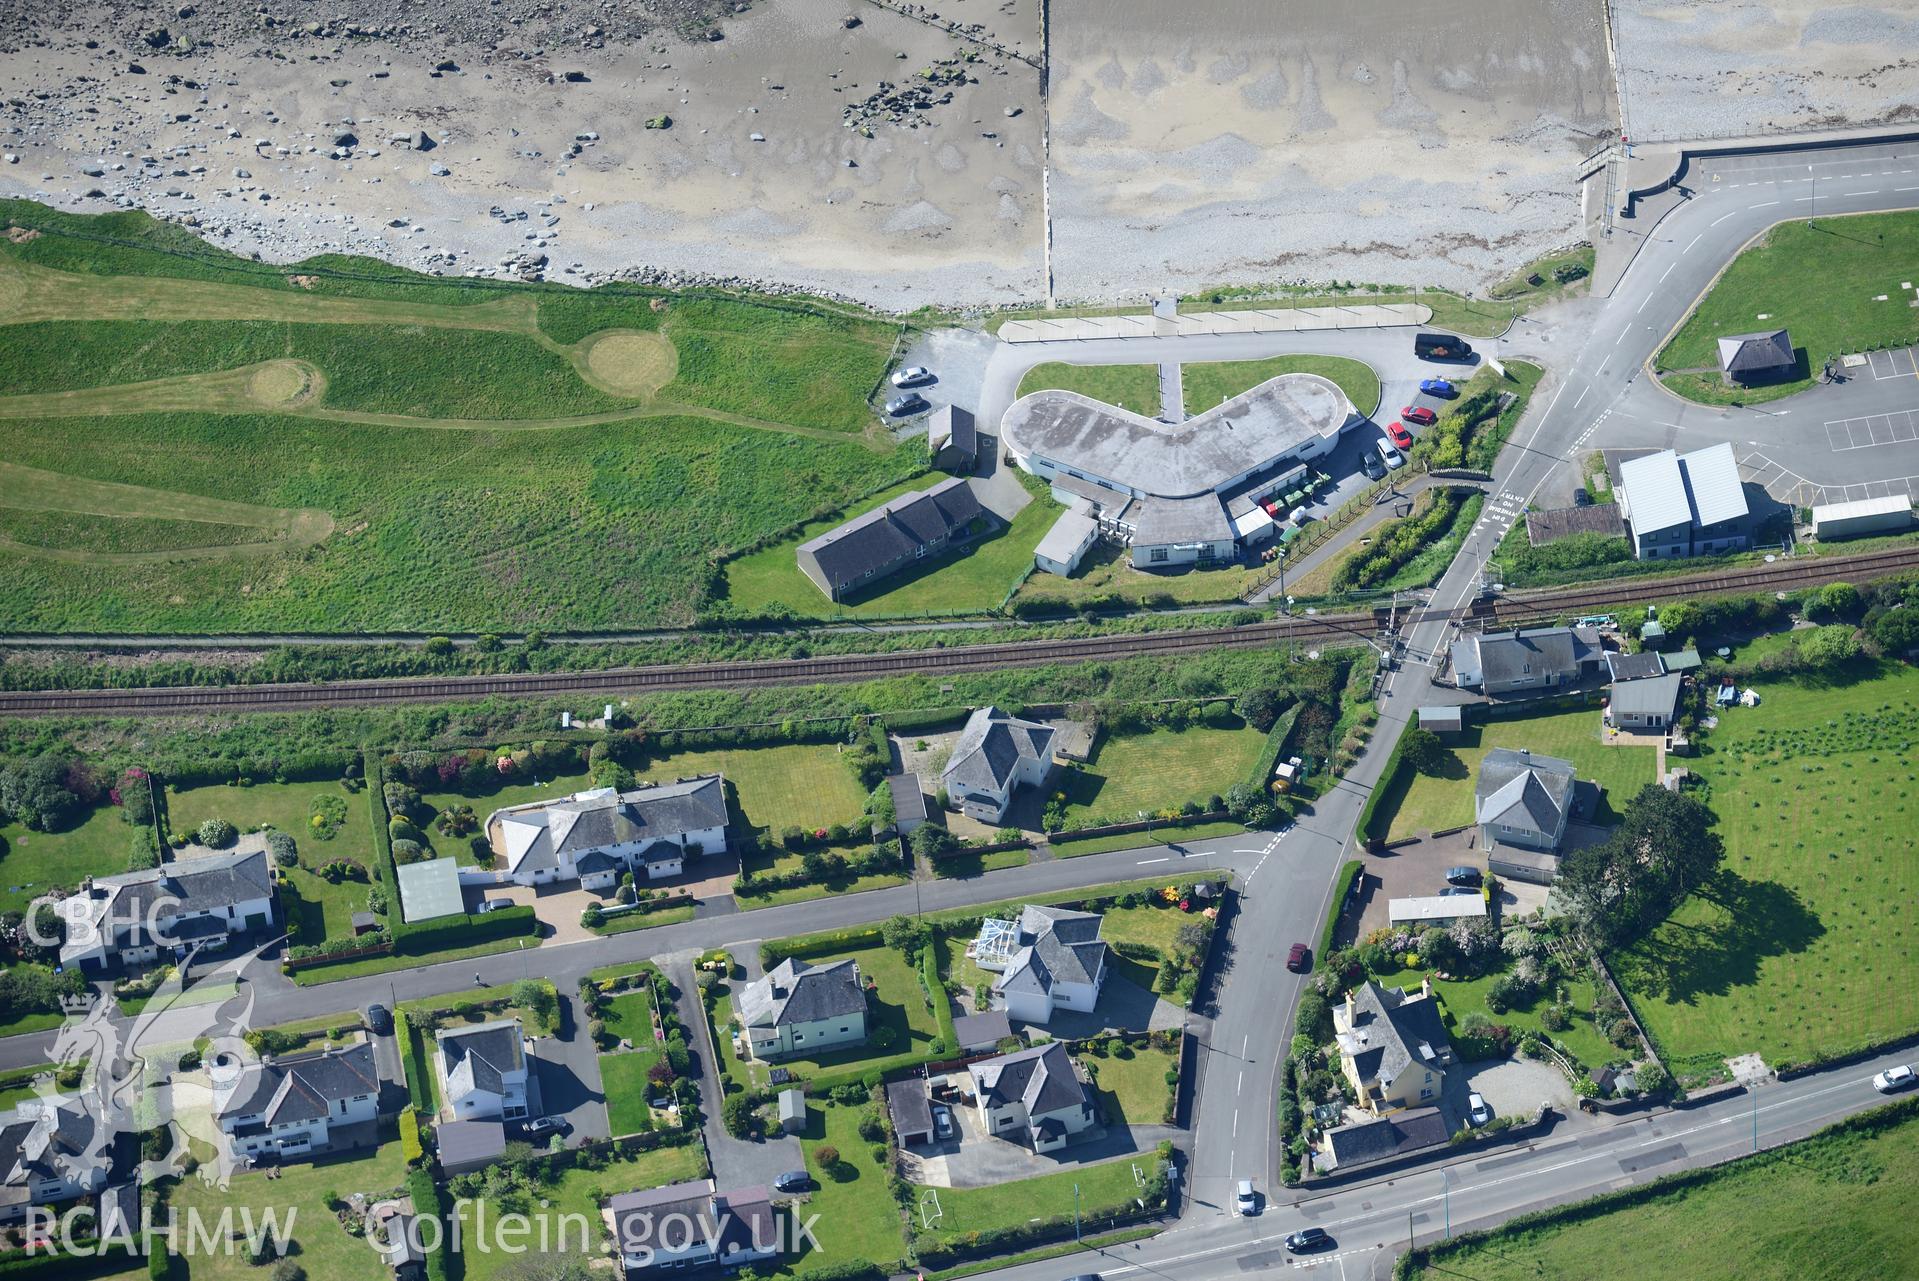 Aerial photography of Morannedd Cafe taken on 3rd May 2017.  Baseline aerial reconnaissance survey for the CHERISH Project. ? Crown: CHERISH PROJECT 2017. Produced with EU funds through the Ireland Wales Co-operation Programme 2014-2020. All material made freely available through the Open Government Licence.